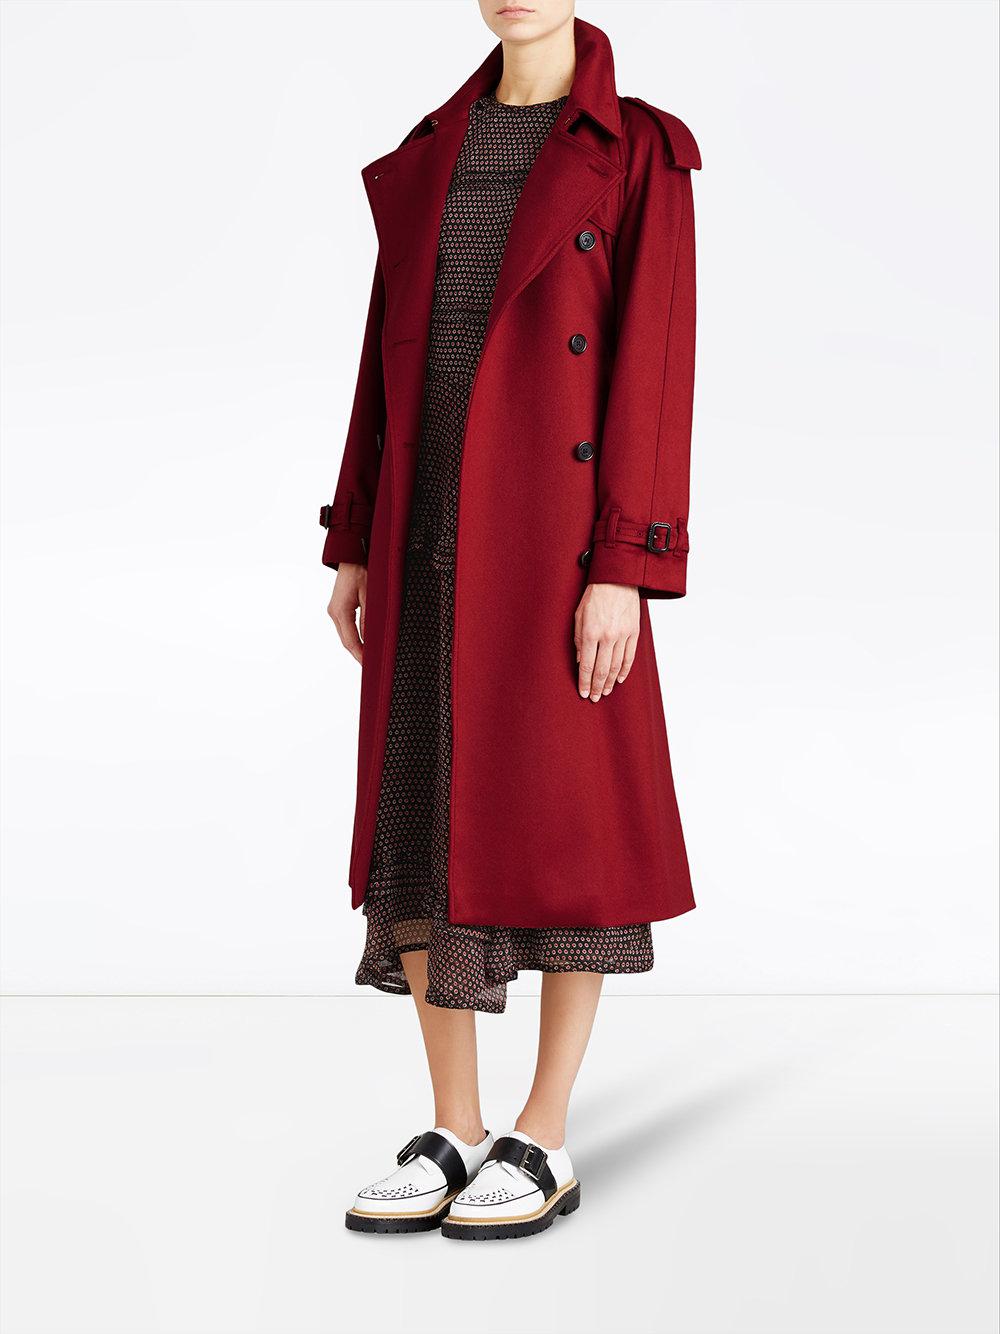 Burberry Cashmere Classic Trench Coat in Red - Lyst